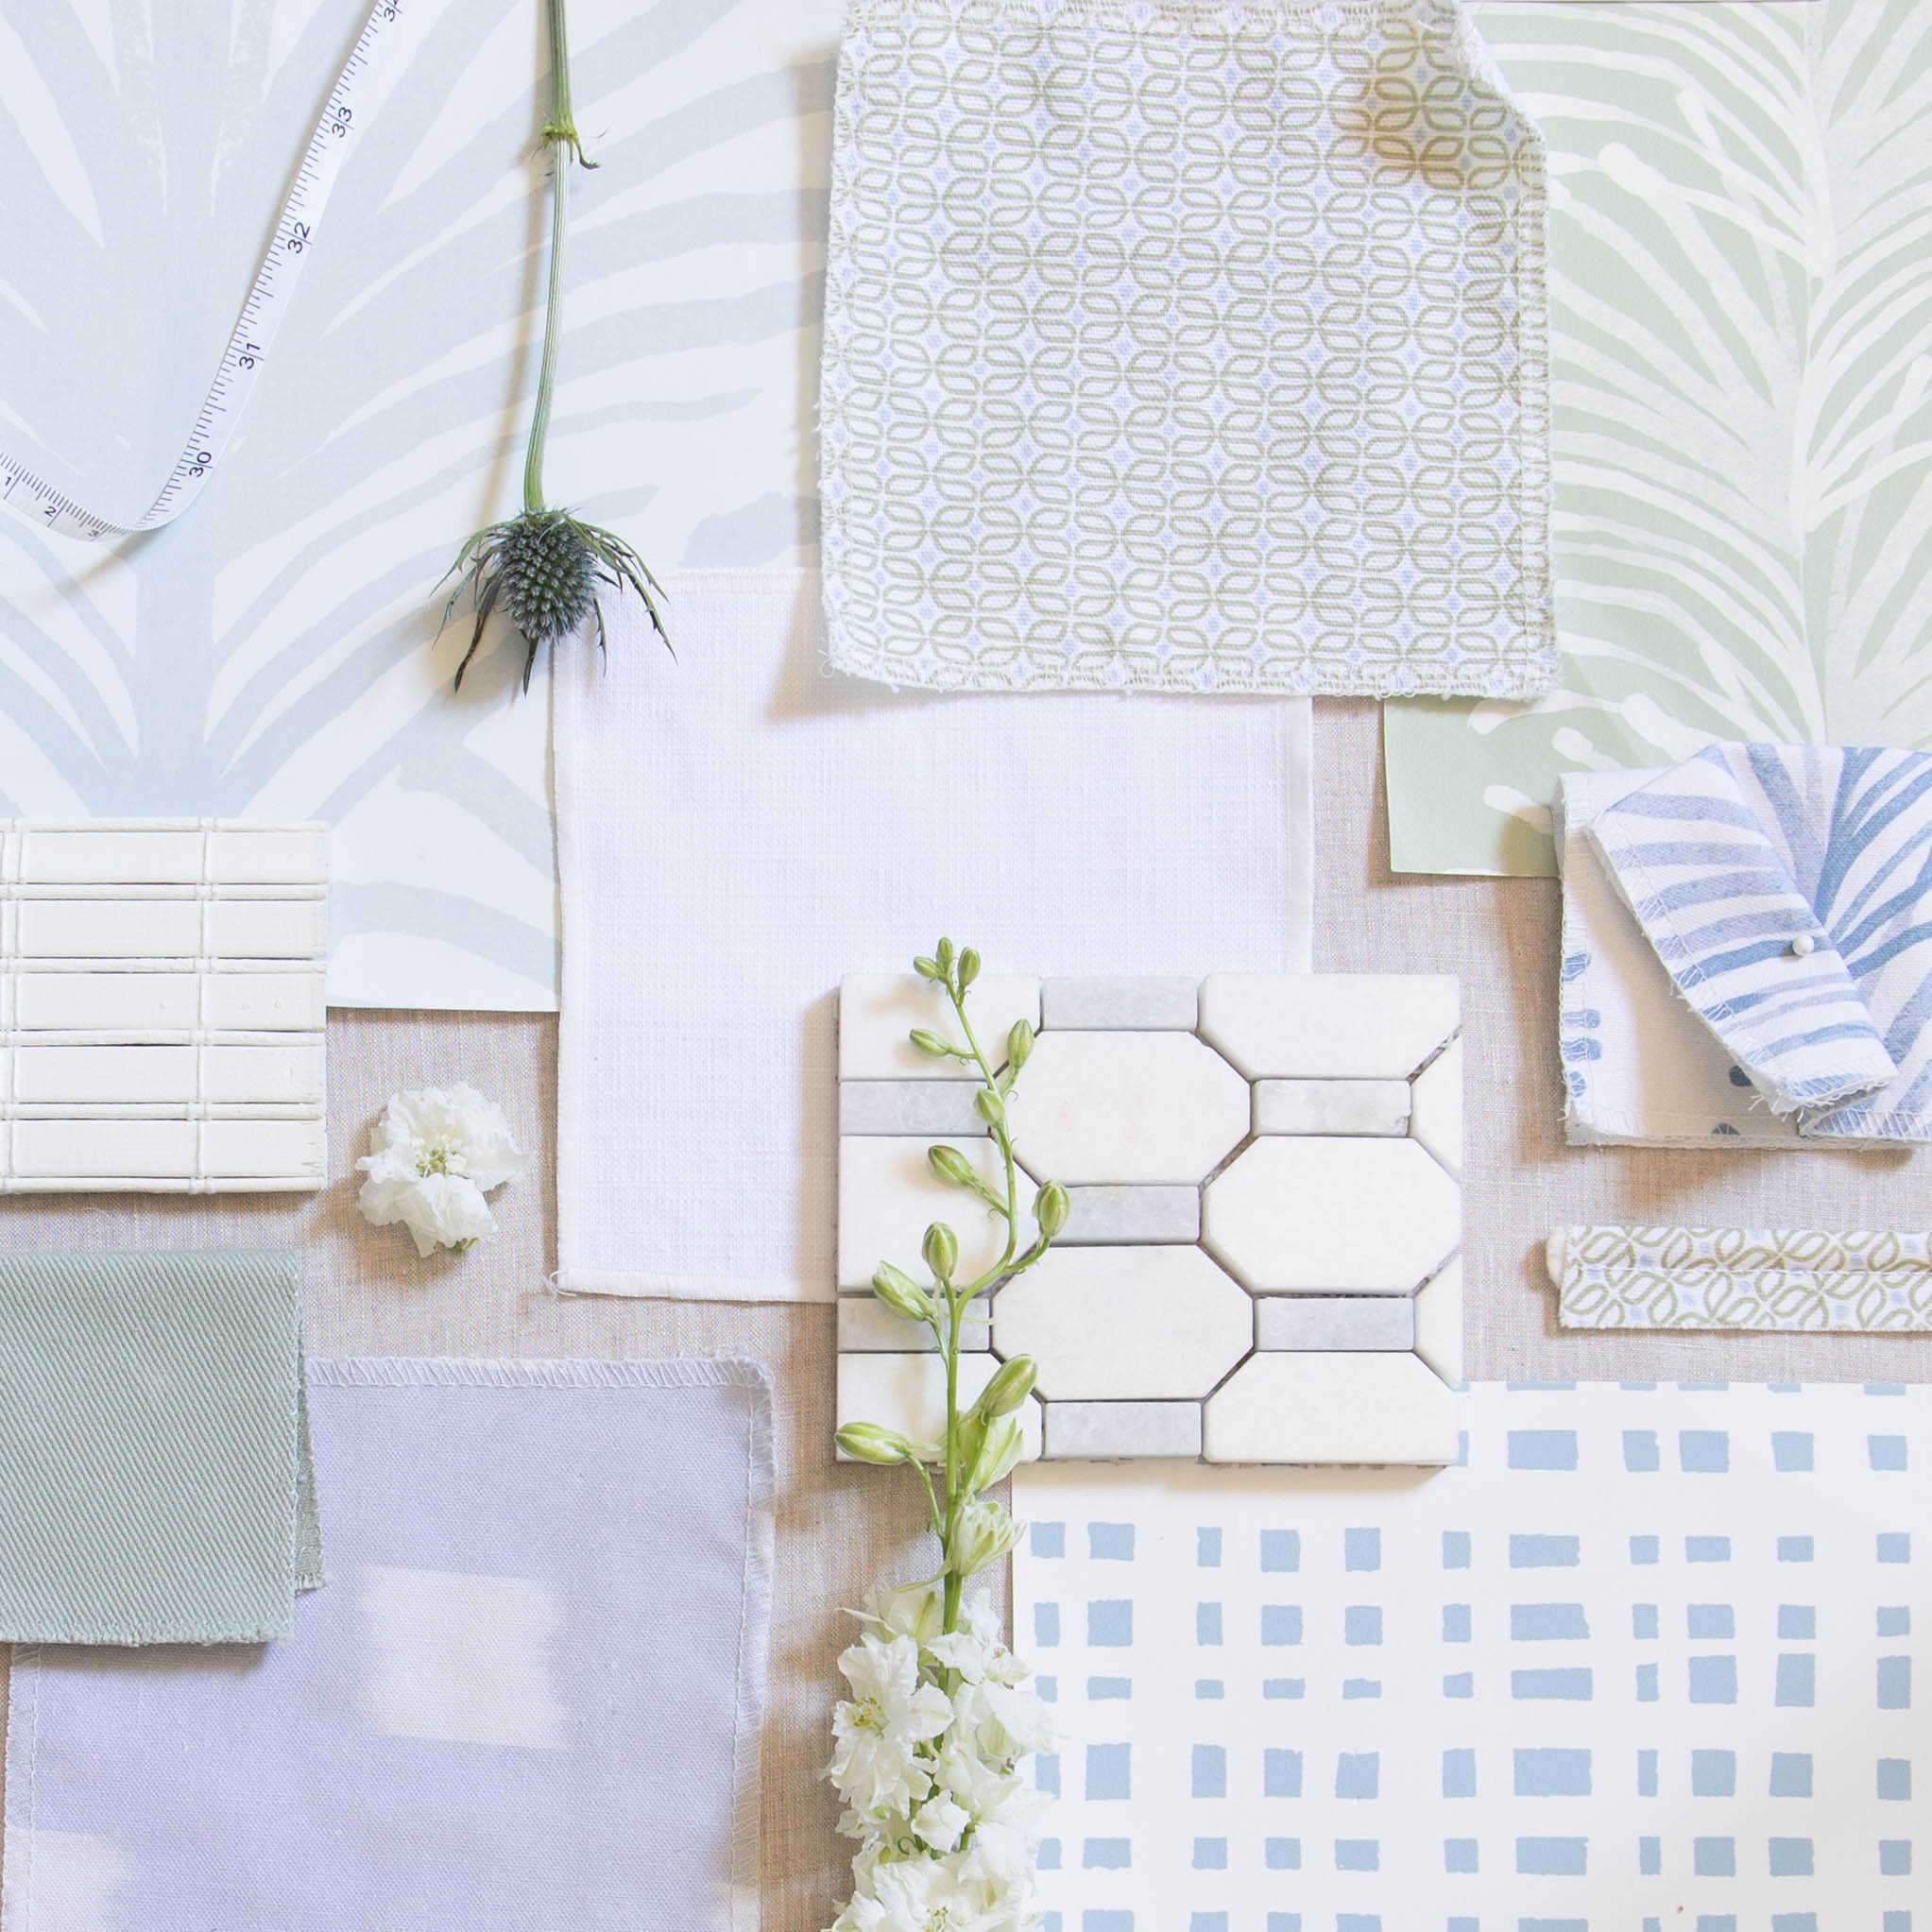 Interior design moodboard and fabric inspirations with Sky Blue Botanical Stripe Printed Swatch, Moss Green Geometric Printed Swatch, Sky Blue Gingham Printed Swatch, and Sky Blue Pattern Printed Swatch 